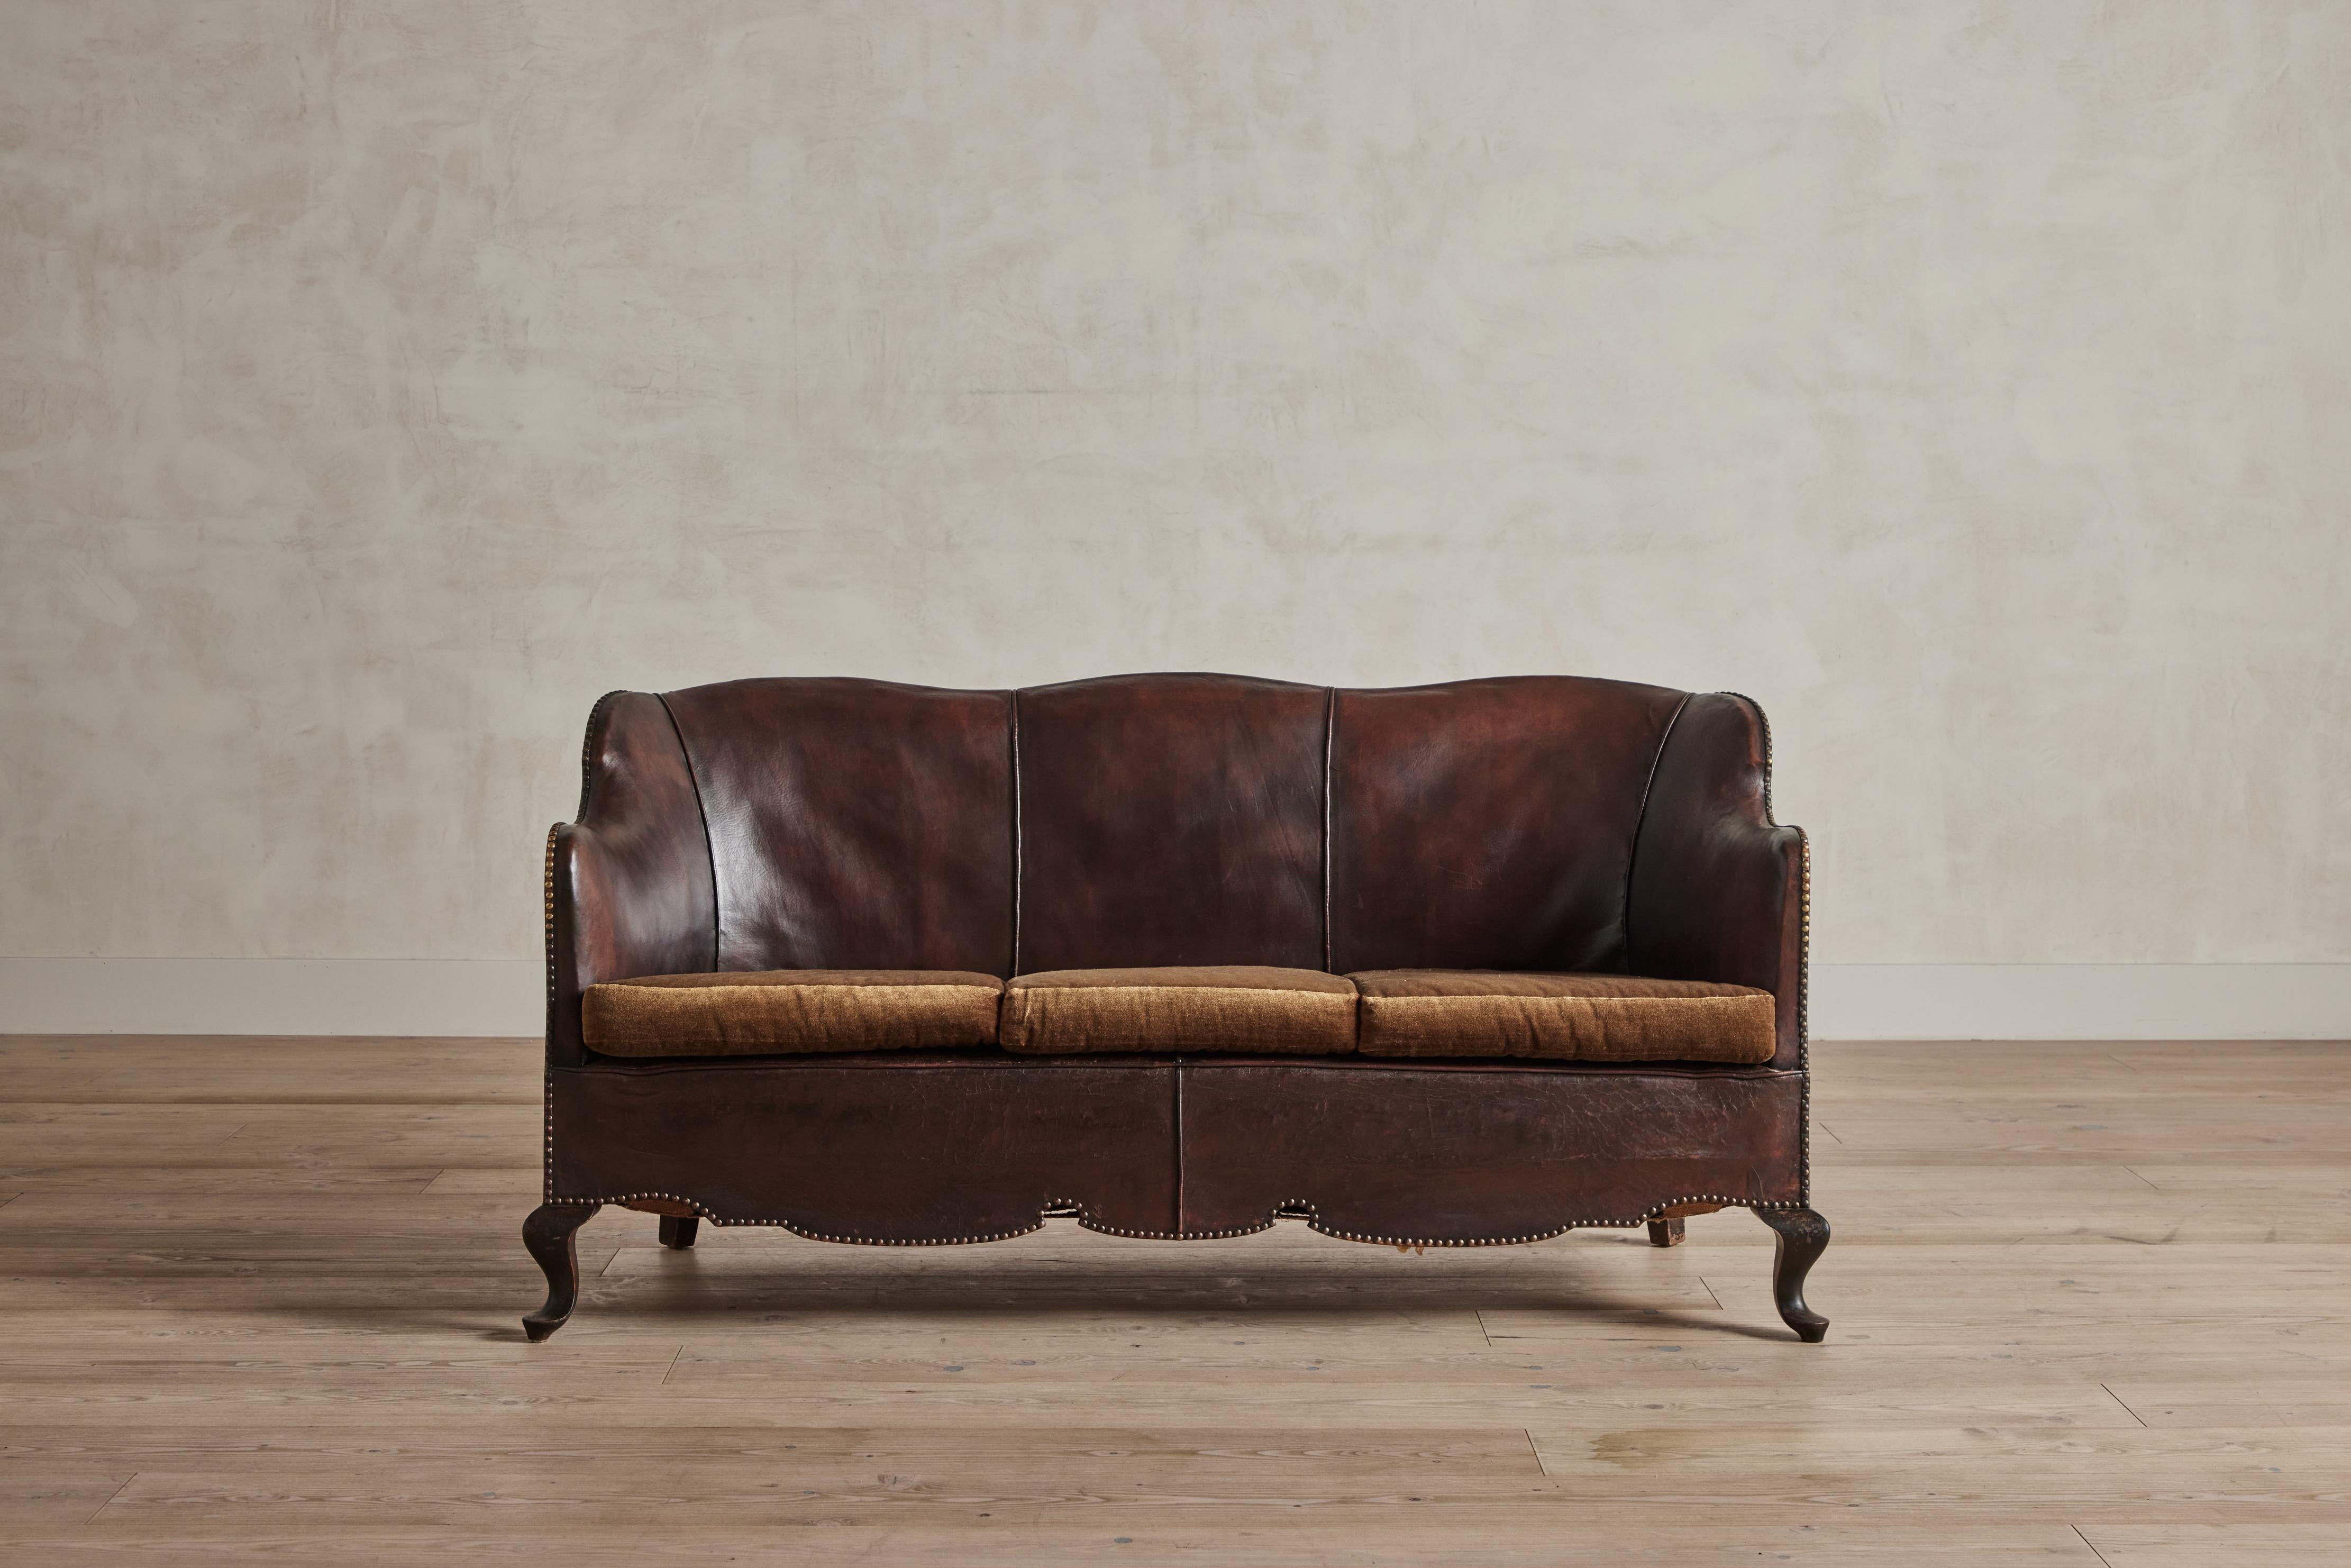 Leather sofa with velvet cushions and brass head detailing from Denmark circa 1910. Original manufacturer metal tag on the back reads 